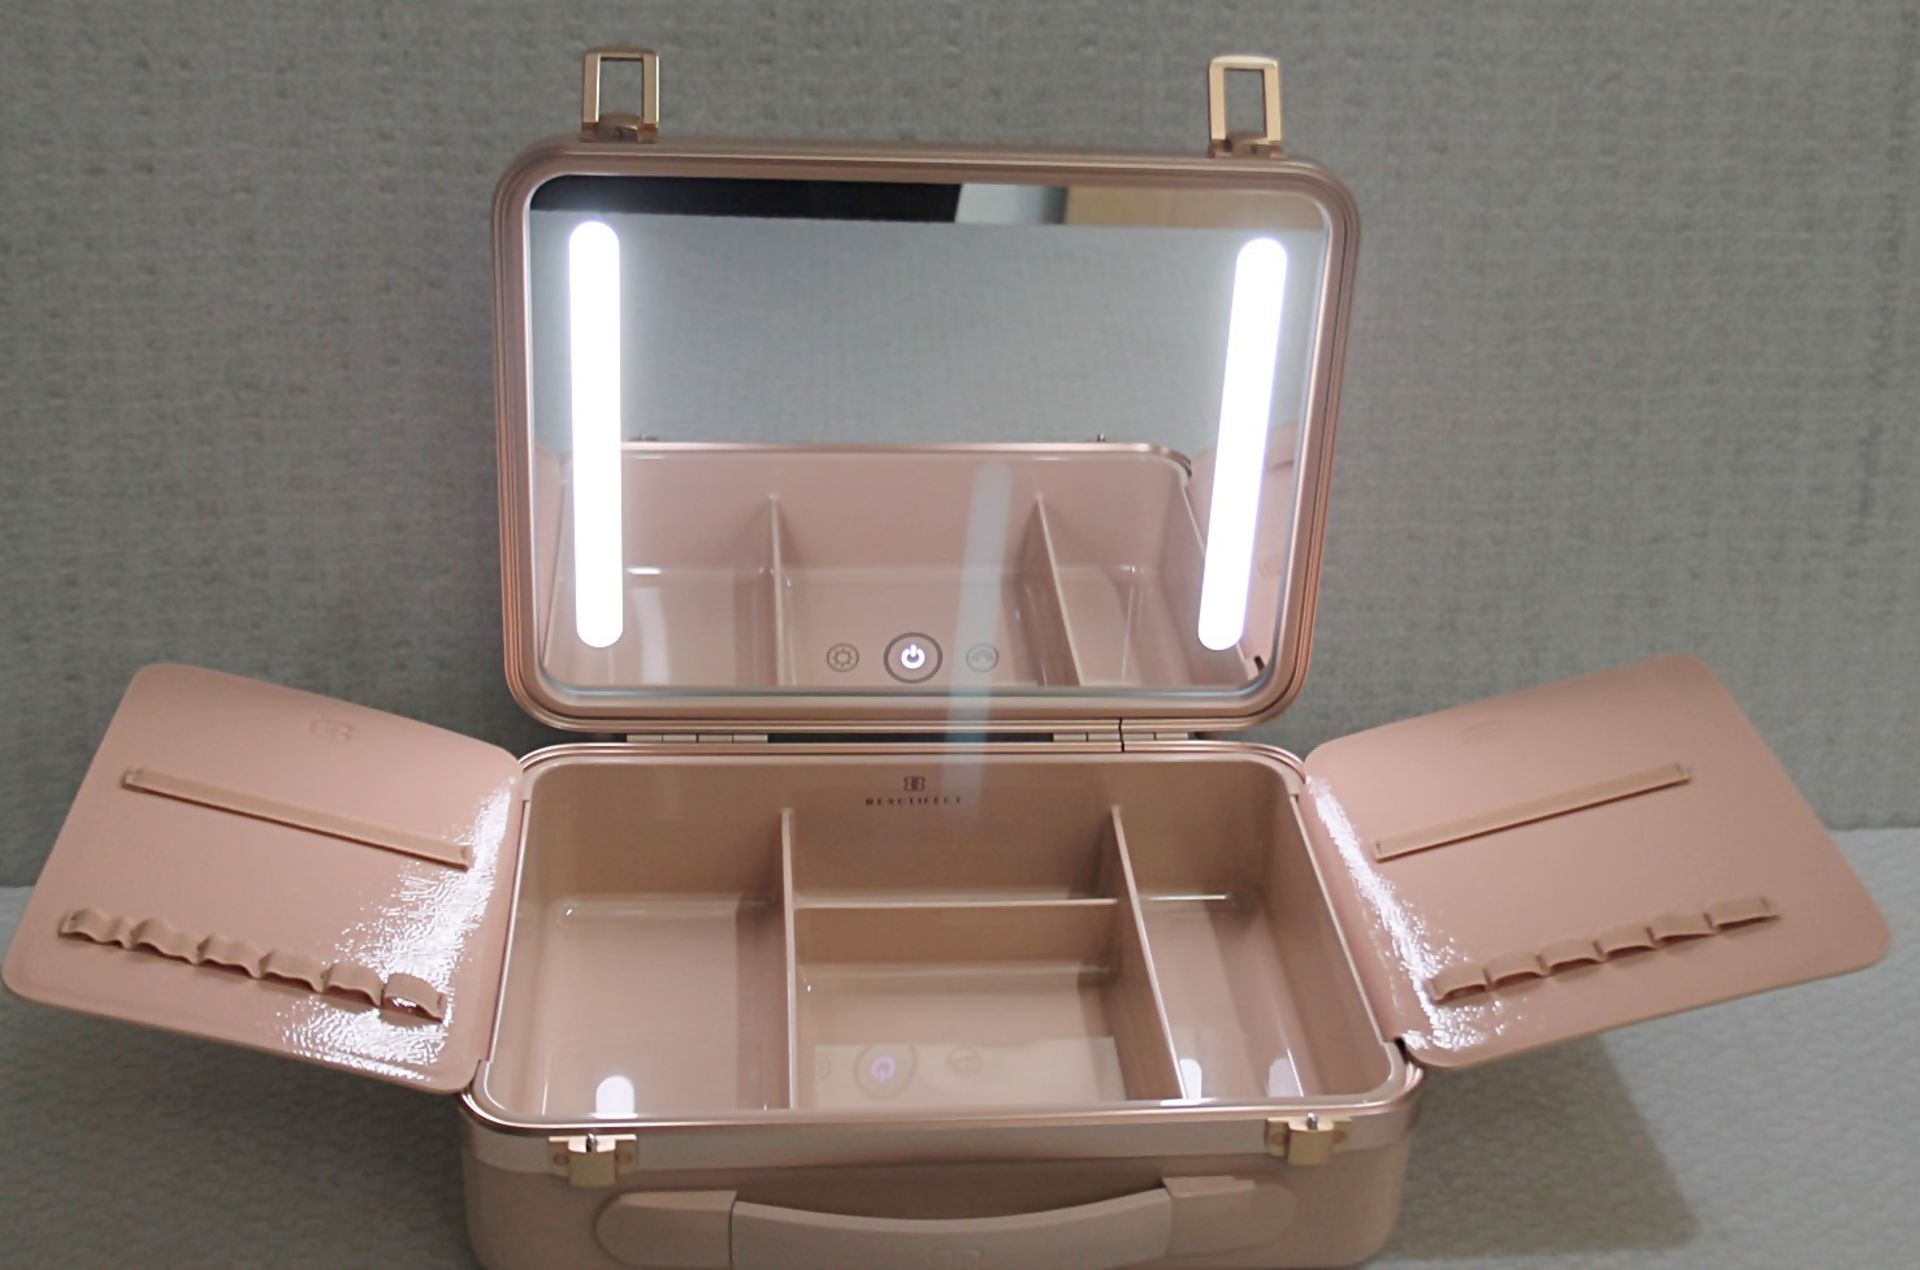 1 x BEAUTIFECT 'Beautifect Box' Make-Up Carry Case With Built-in Illuminated Mirror - RRP £279.00 - Image 9 of 11